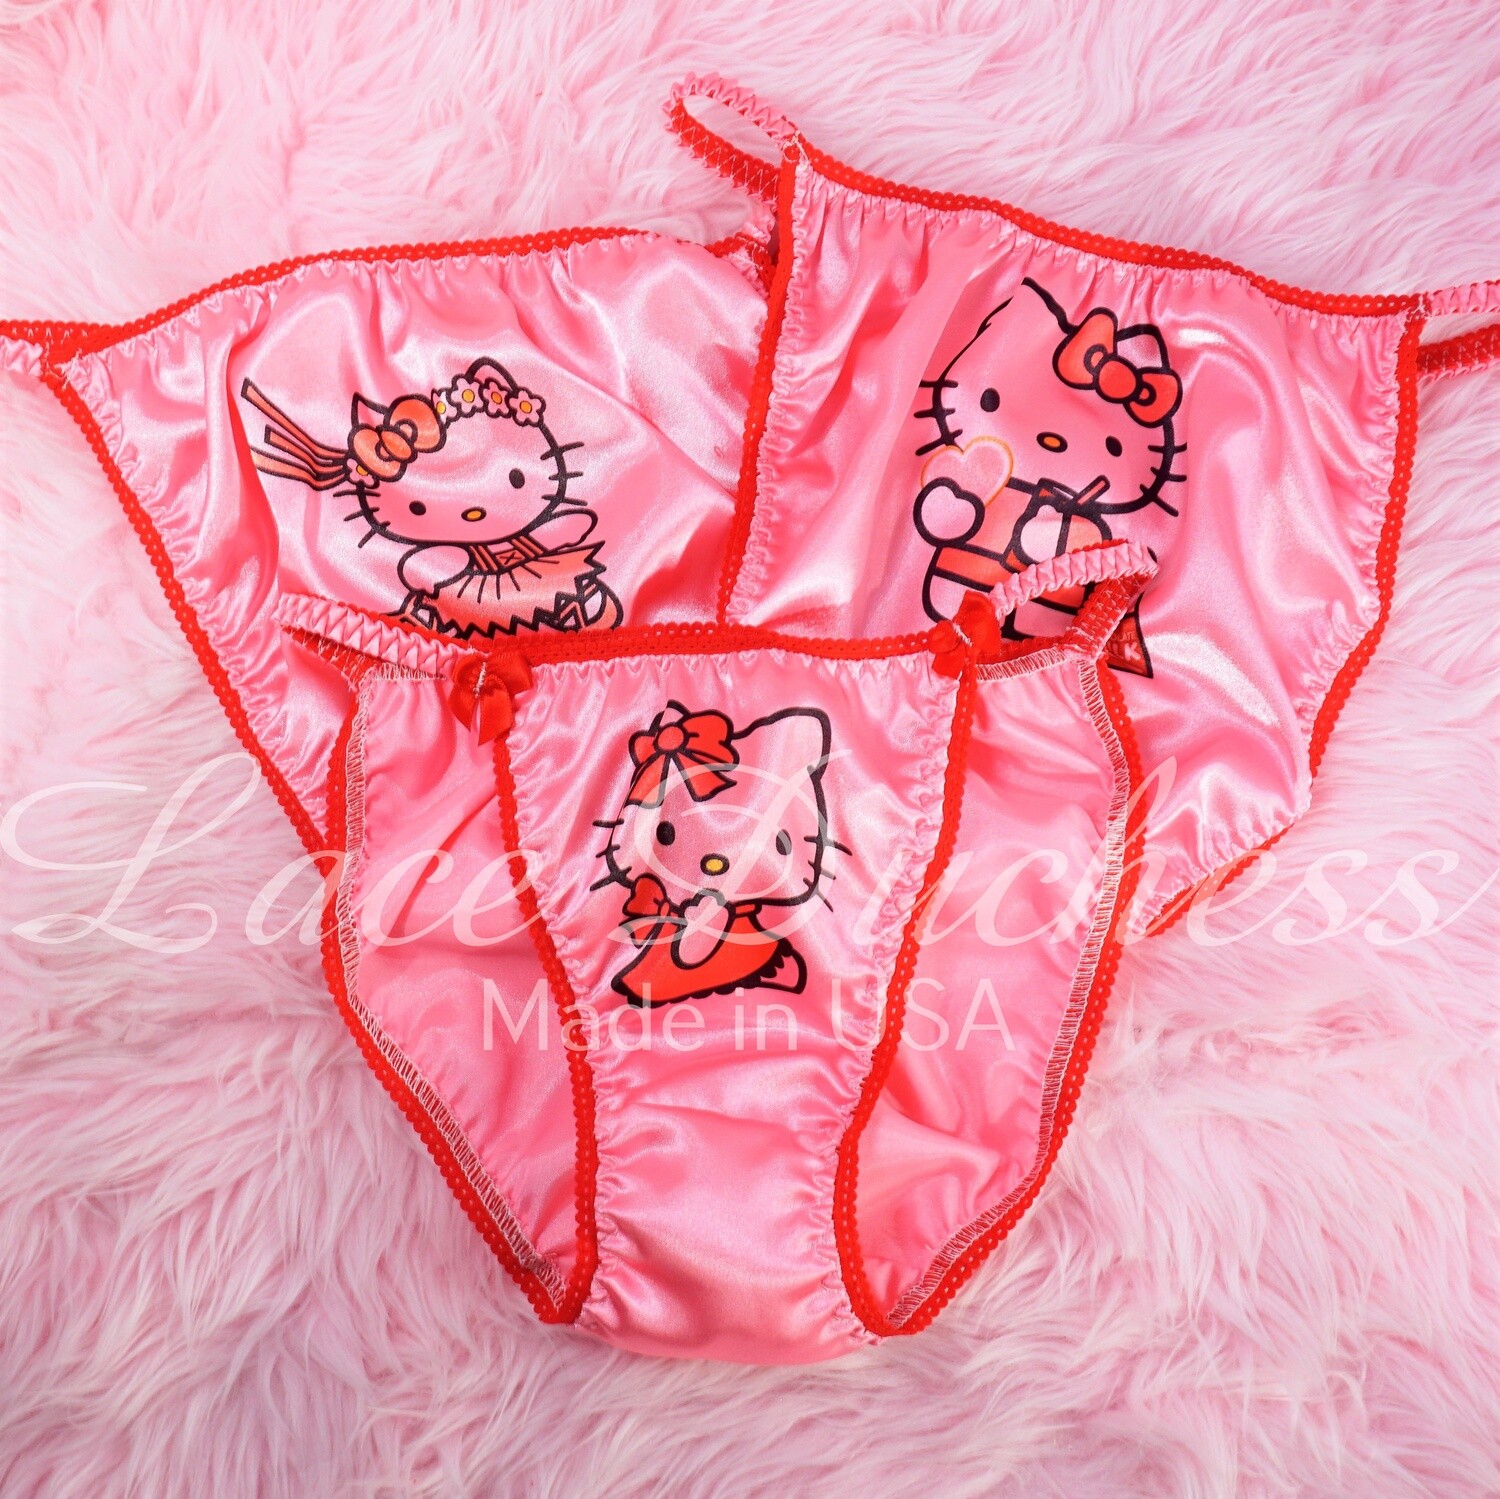 Lace Duchess Classic 80's cut Hello Kitty PINK Valentines Day Character movie print sissy satin wet look ladies and men's panties sz 5 6 7 8 9